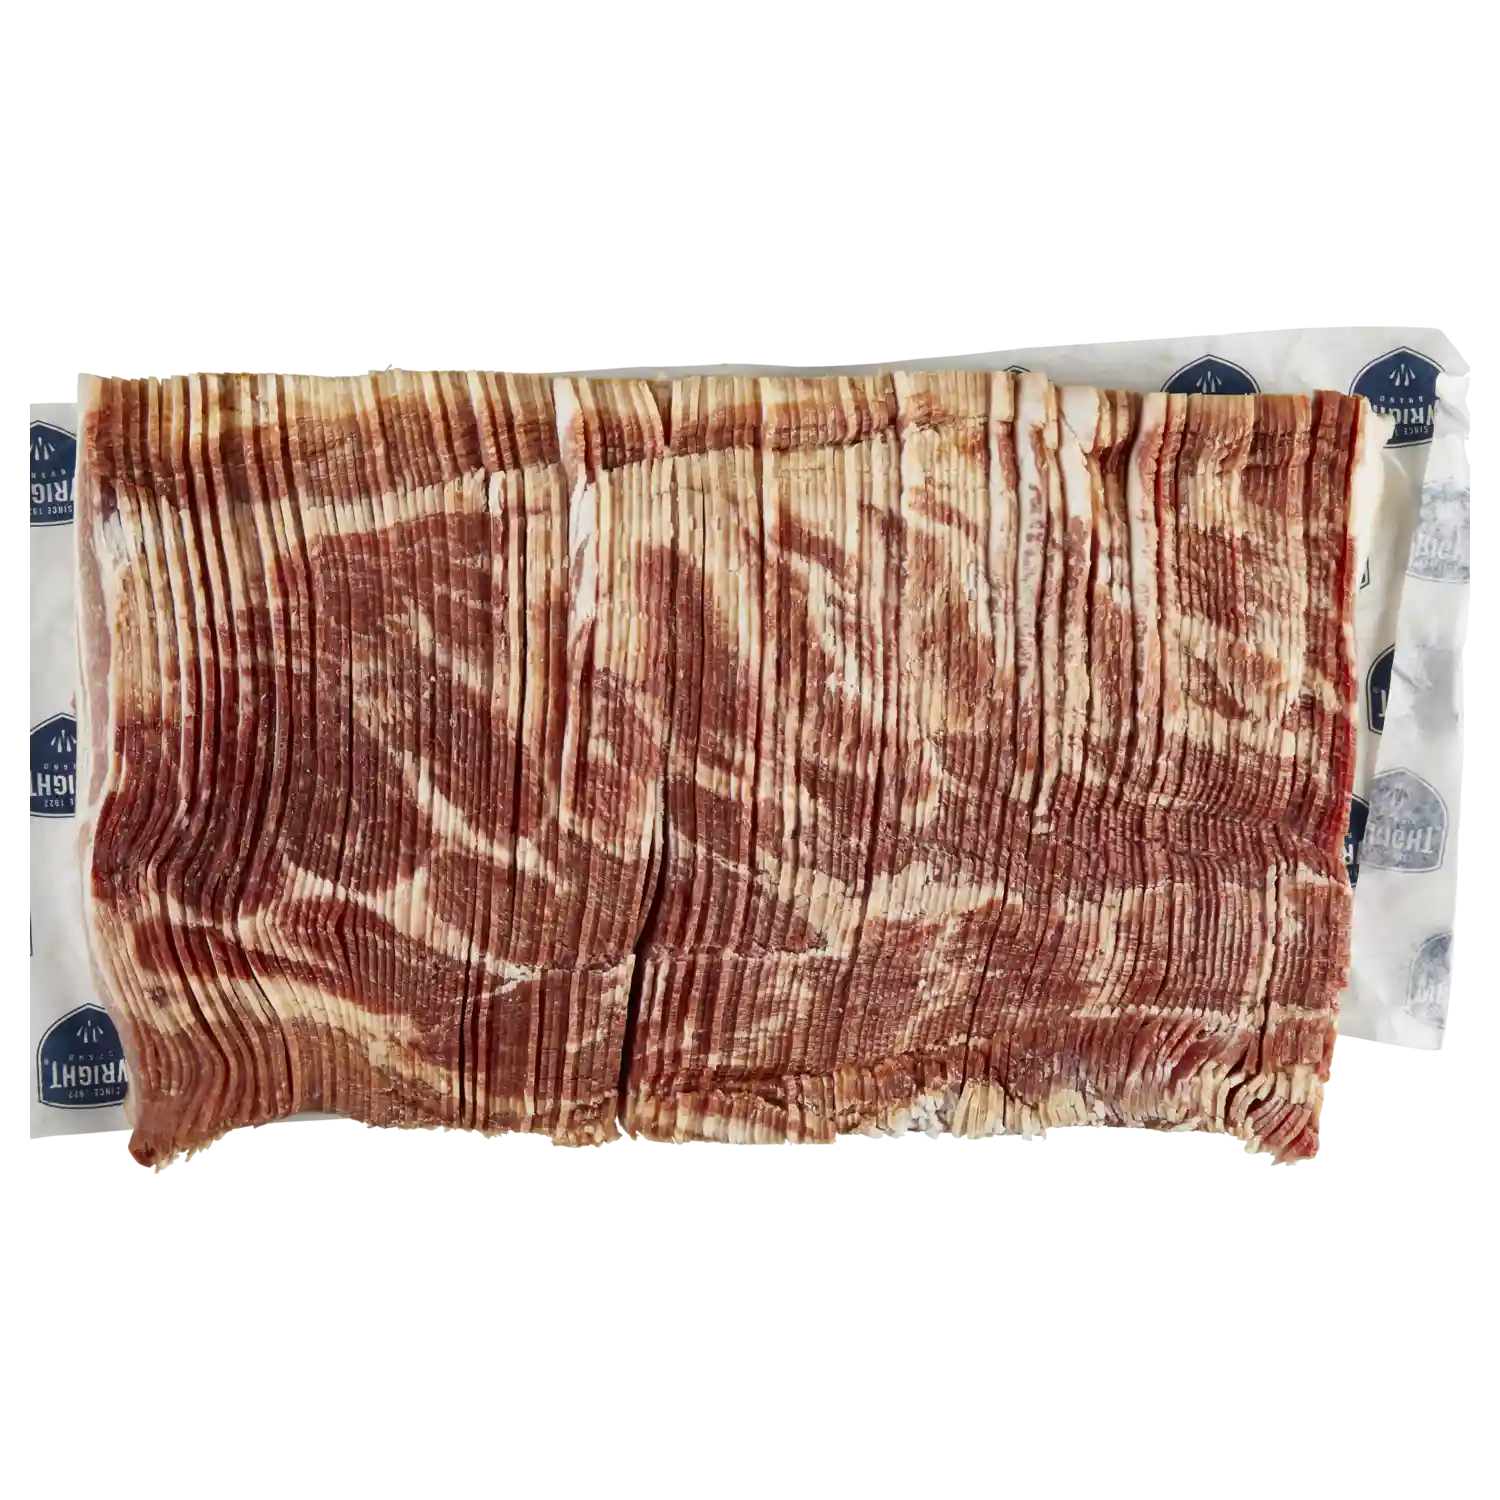 Wright® Brand Naturally Hickory Smoked Regular Sliced Bacon, Bulk, 15 Lbs, 10-14 Slices per Pound, Frozen_image_21